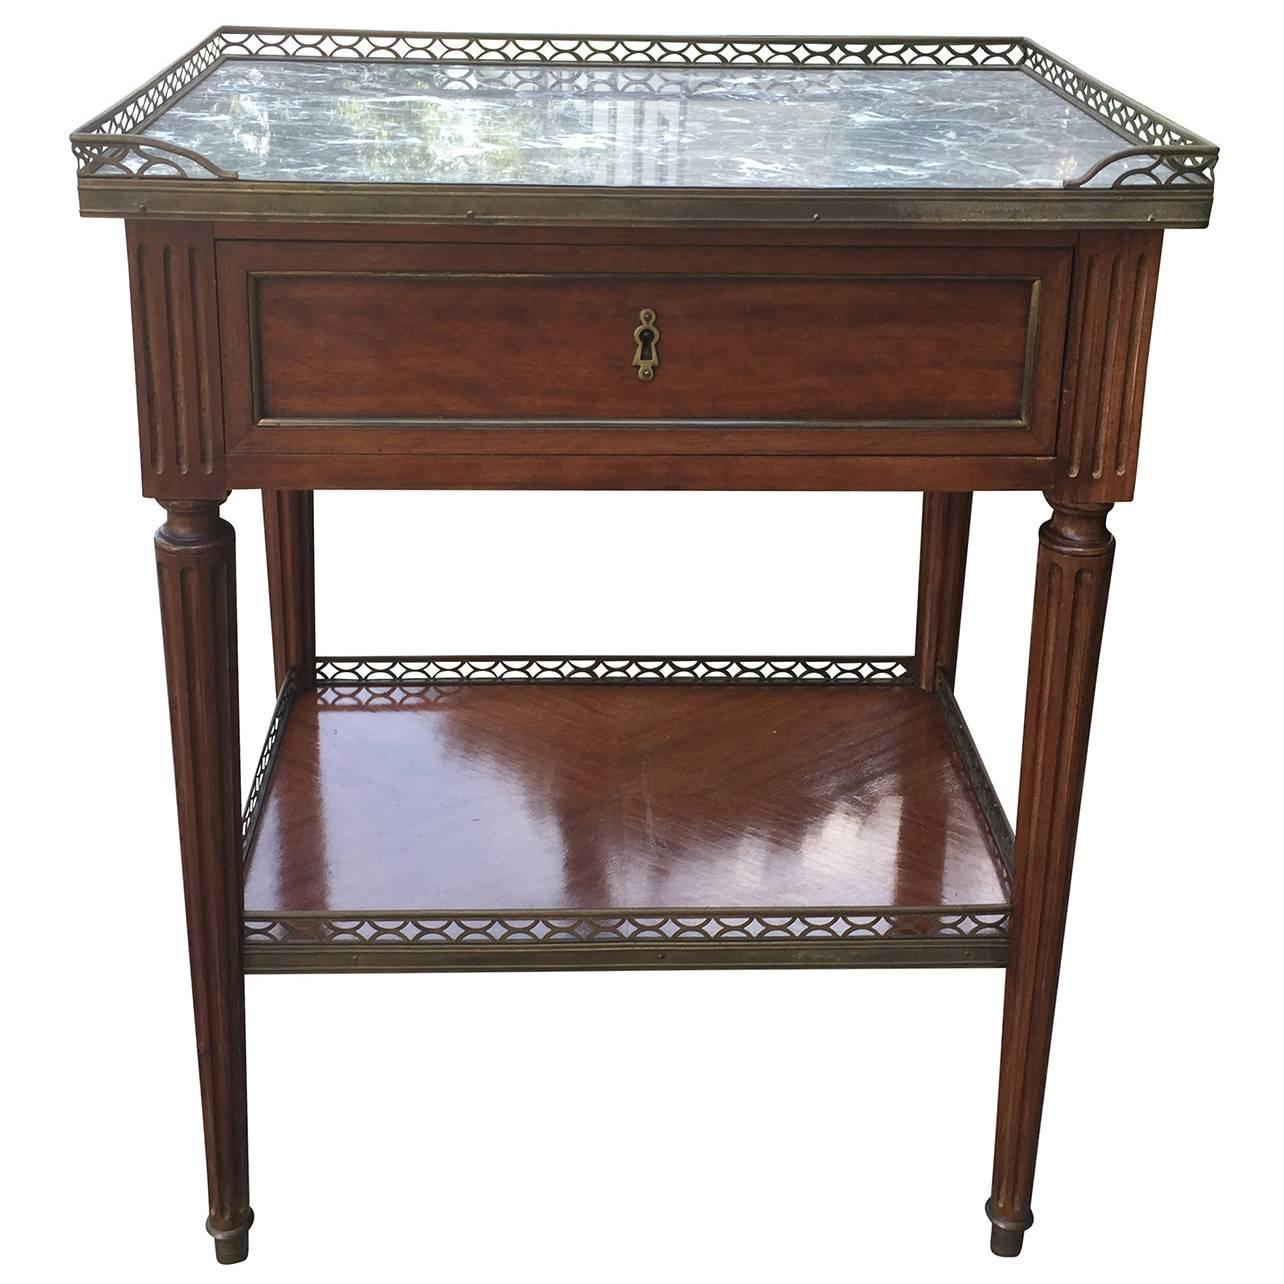 20th Century Louis XVI Style Bedside Table with Marble Top